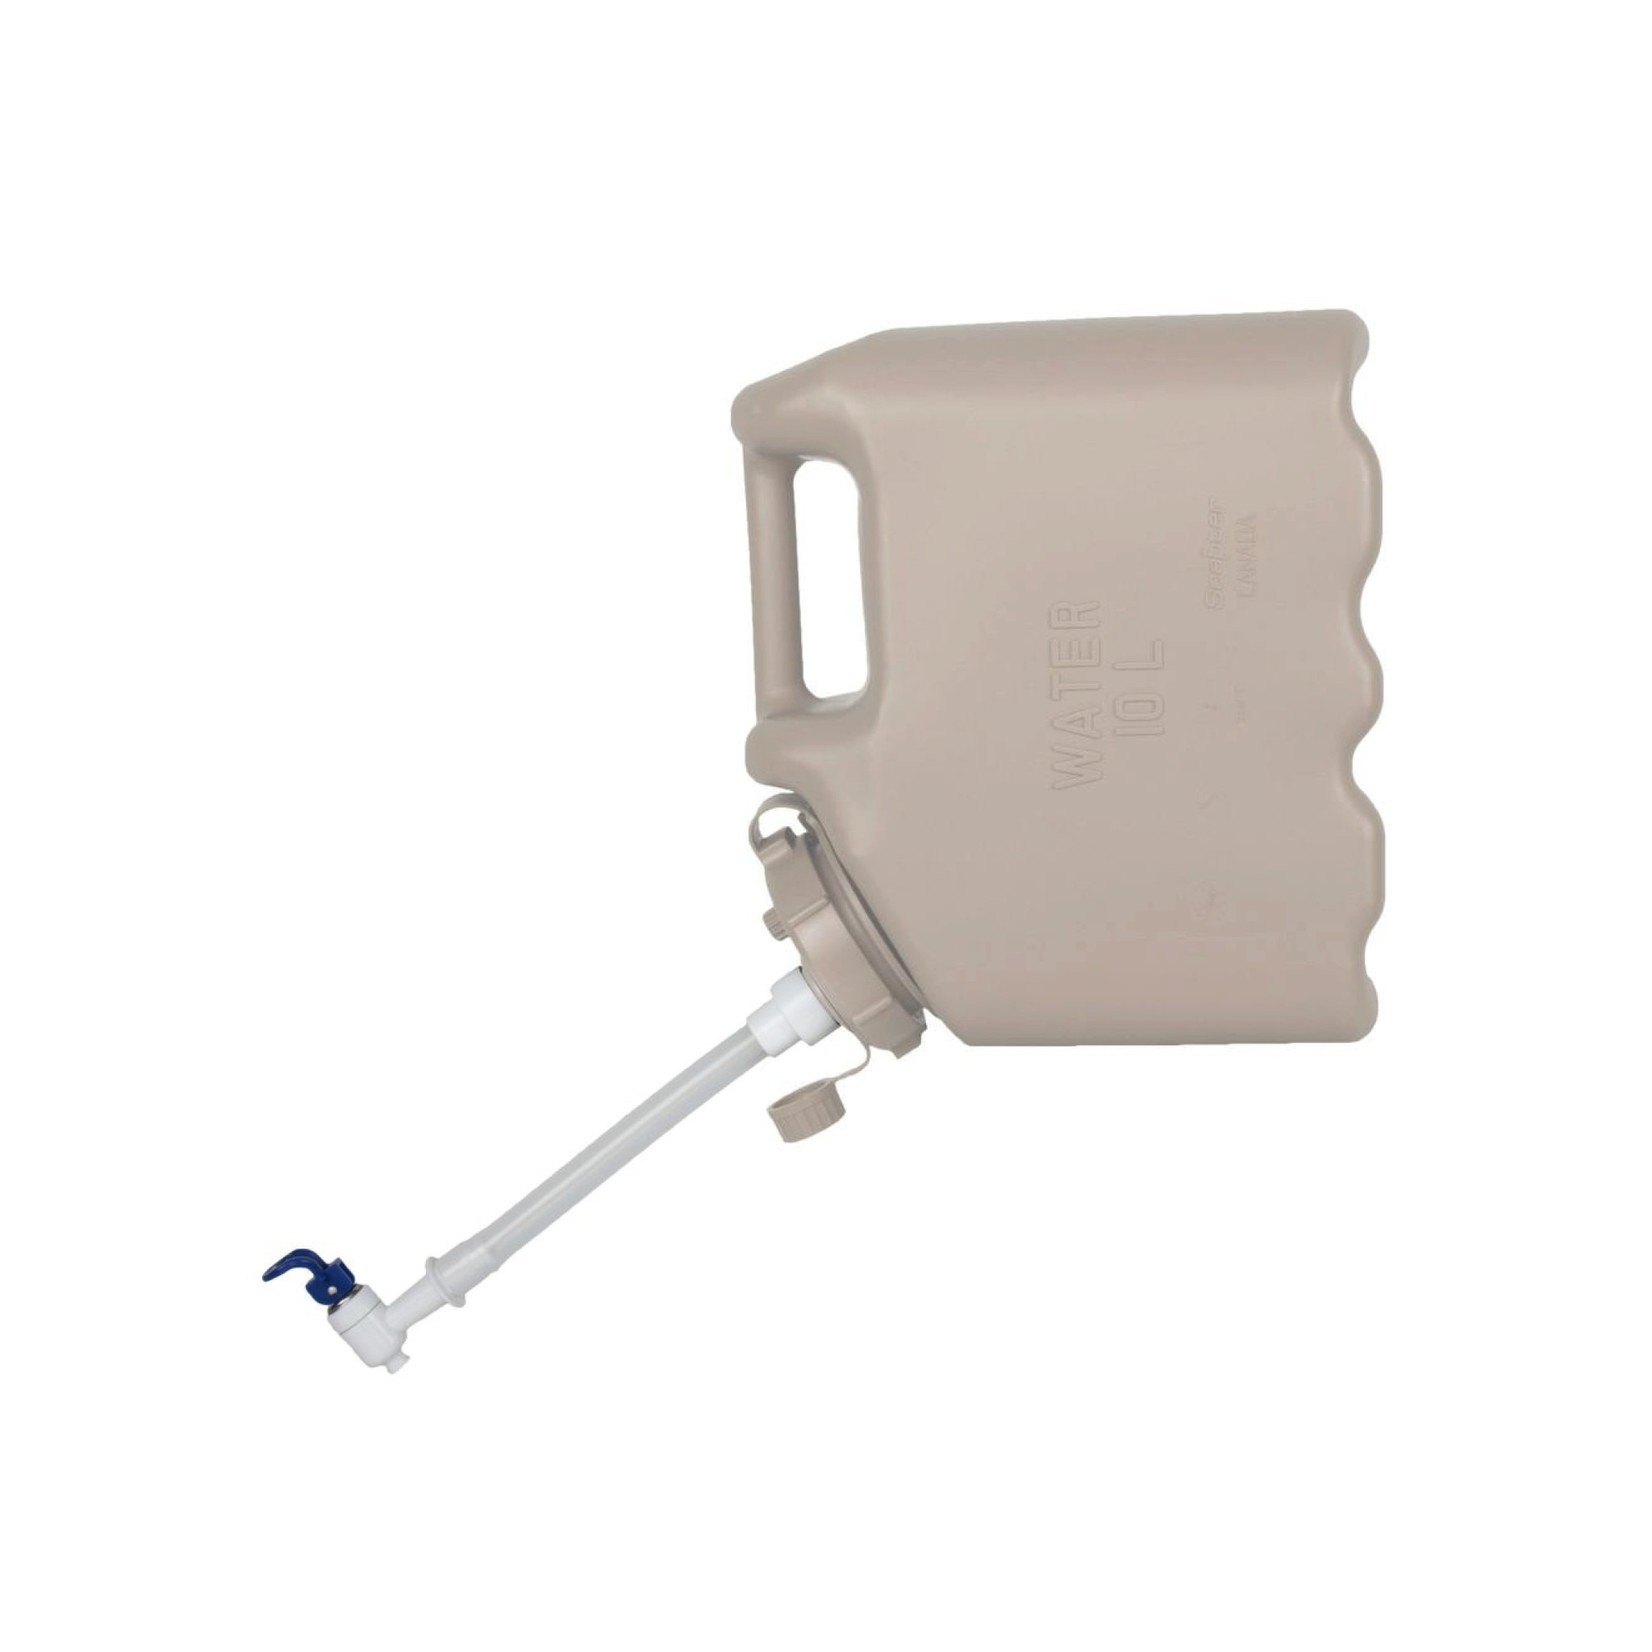 Scepter Water Can Dispensing Nozzle for 5 gallon or 2 1/2 gallon Containers 